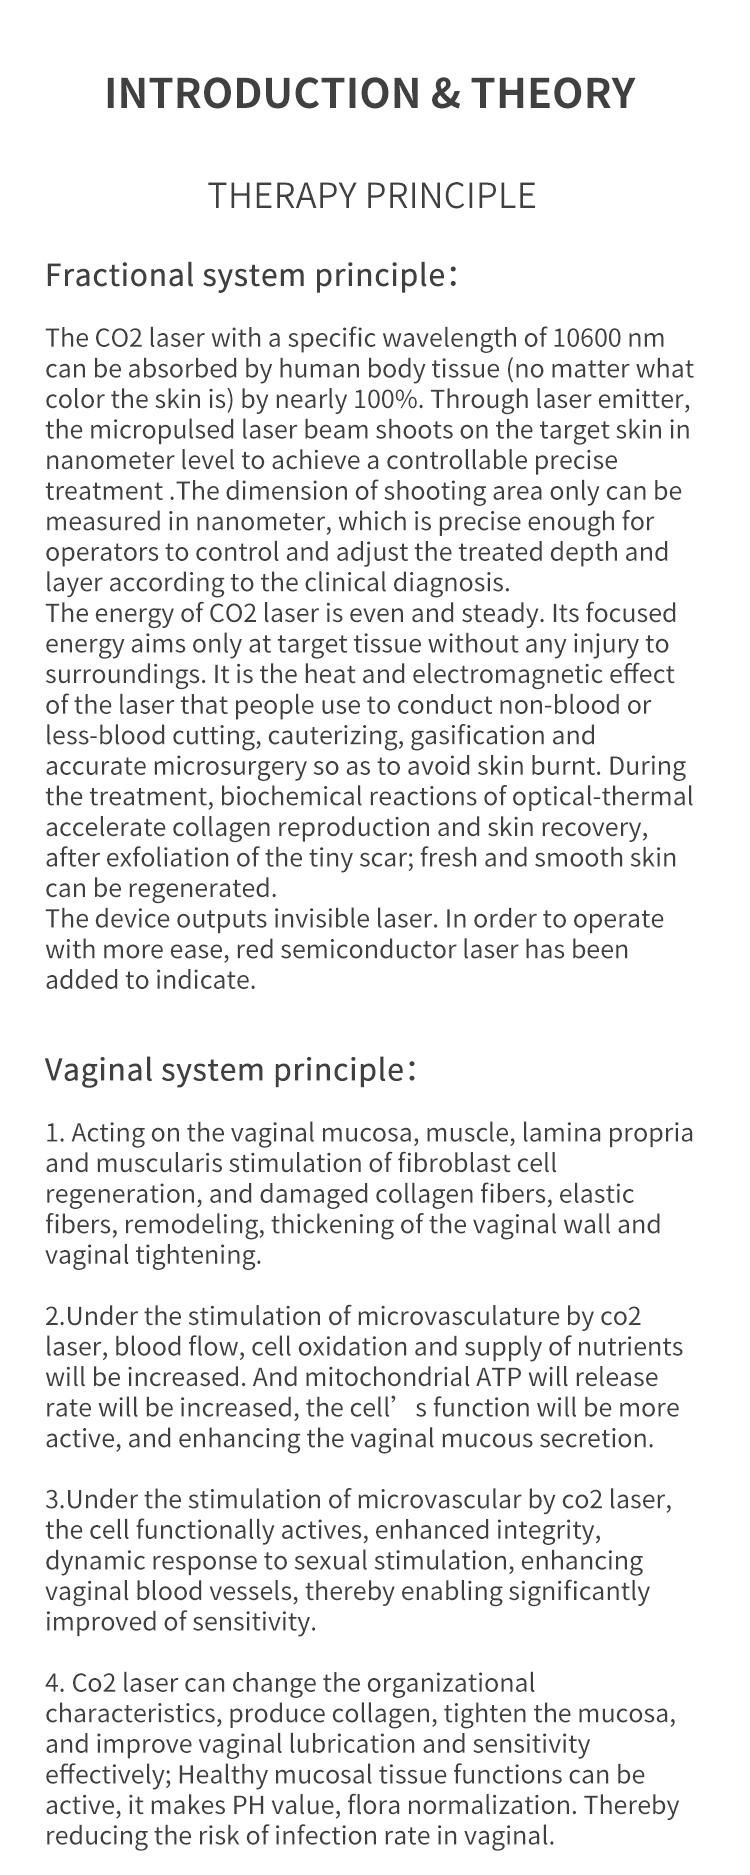 Professional Vaginal Tightening Fractional Beauty Machine Acne Scar Removal RF CO2 Laser Fractional